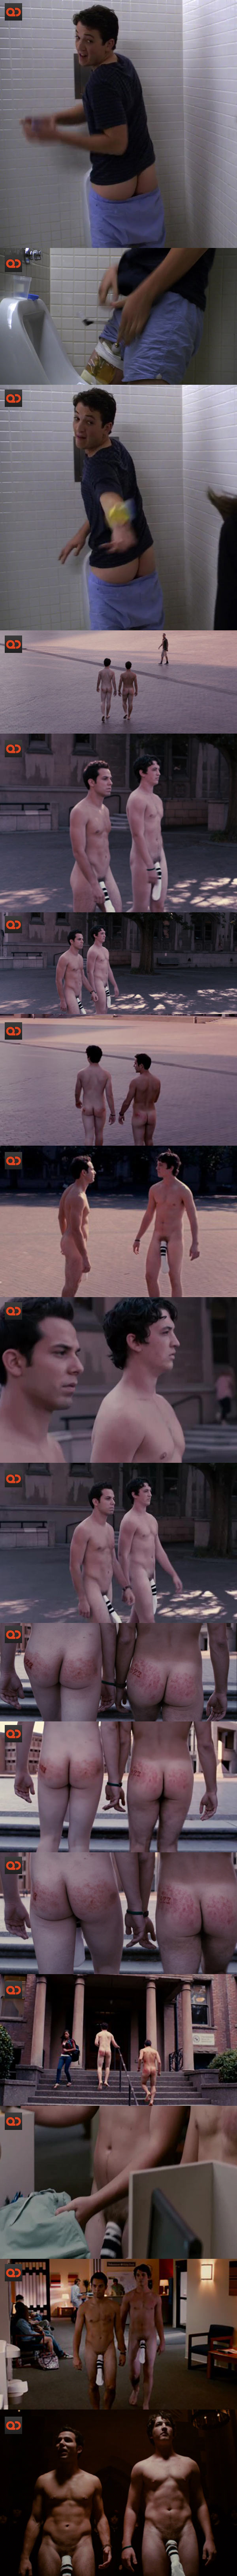 qc-miles_teller_naked_body_21_and_over_get_a_job-collage02